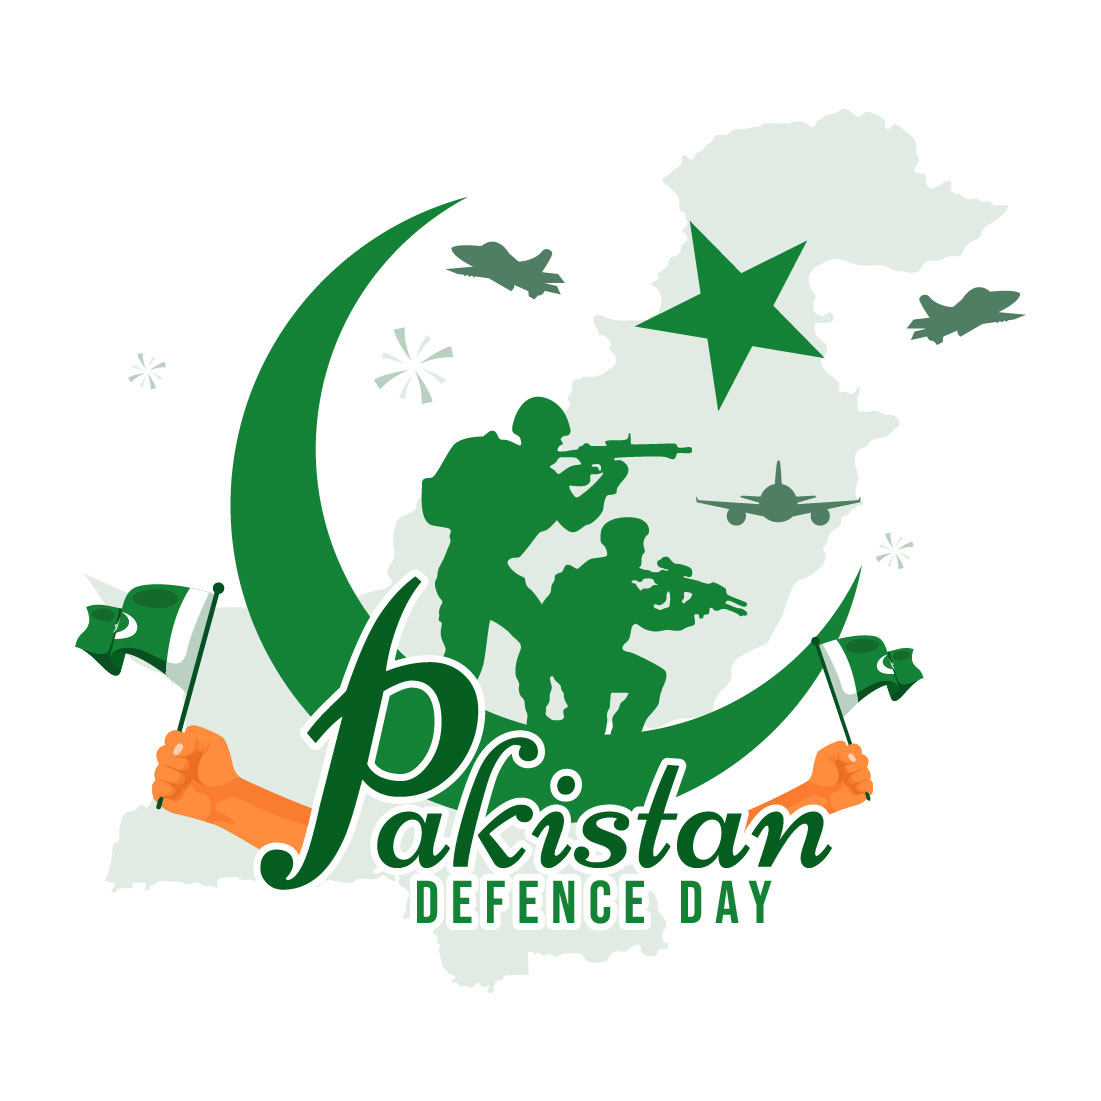 11 Pakistan Defence Day Illustration preview image.